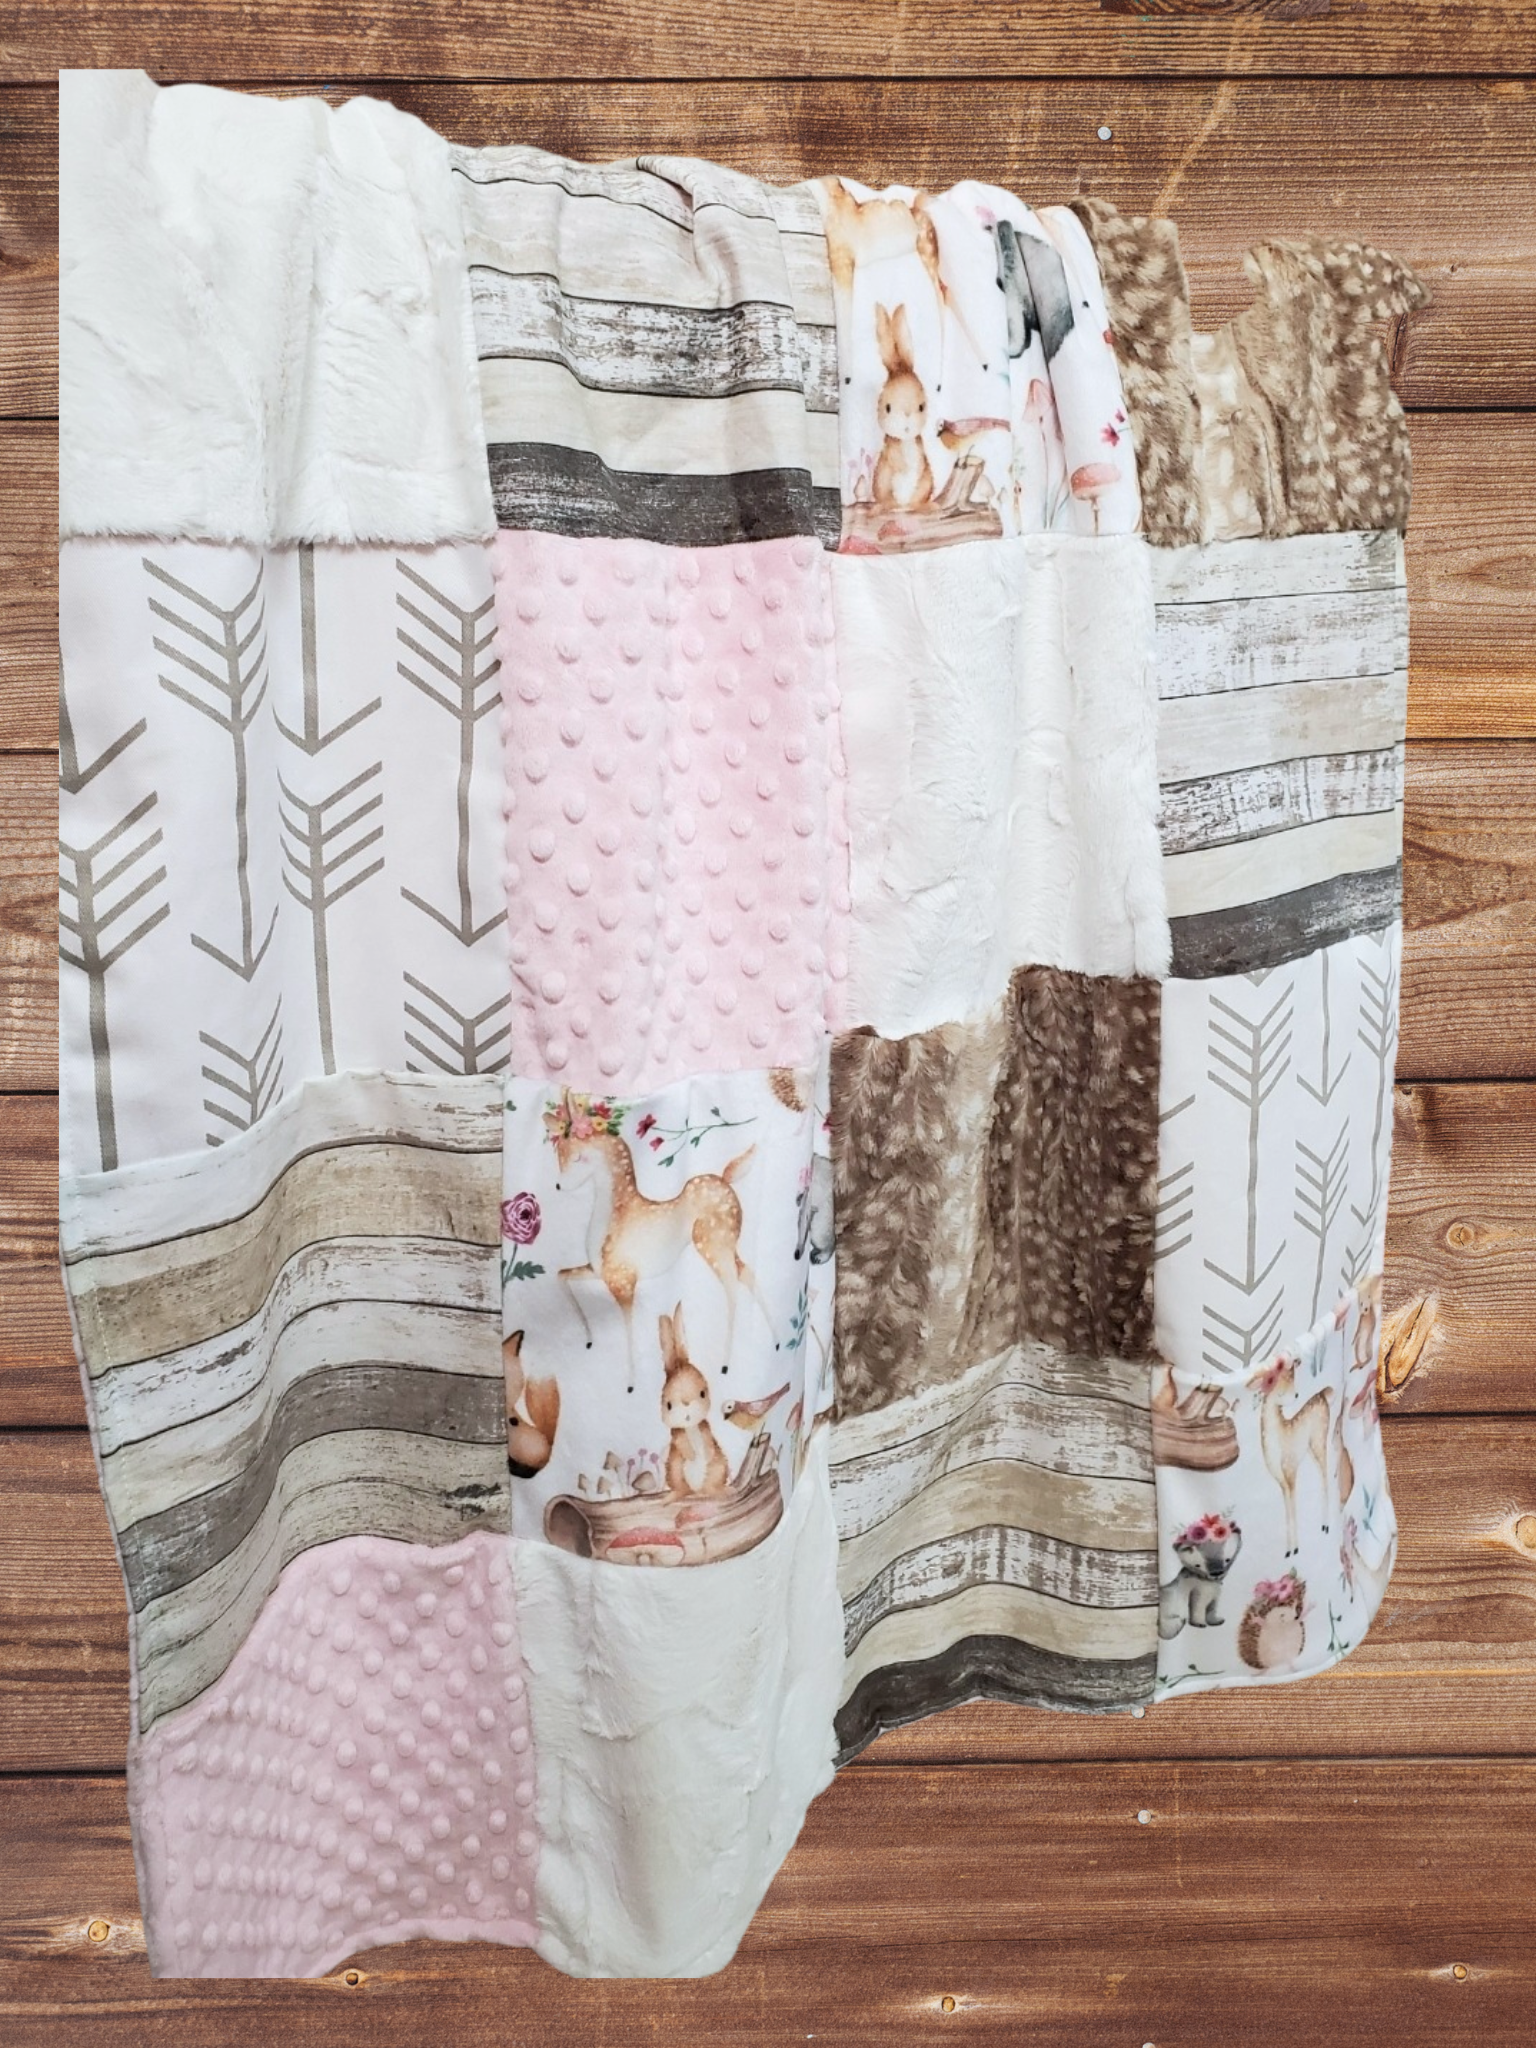 Patchwork Blanket - Floral Woodland Animals and Fawn Minky Woodland Blanket - DBC Baby Bedding Co 